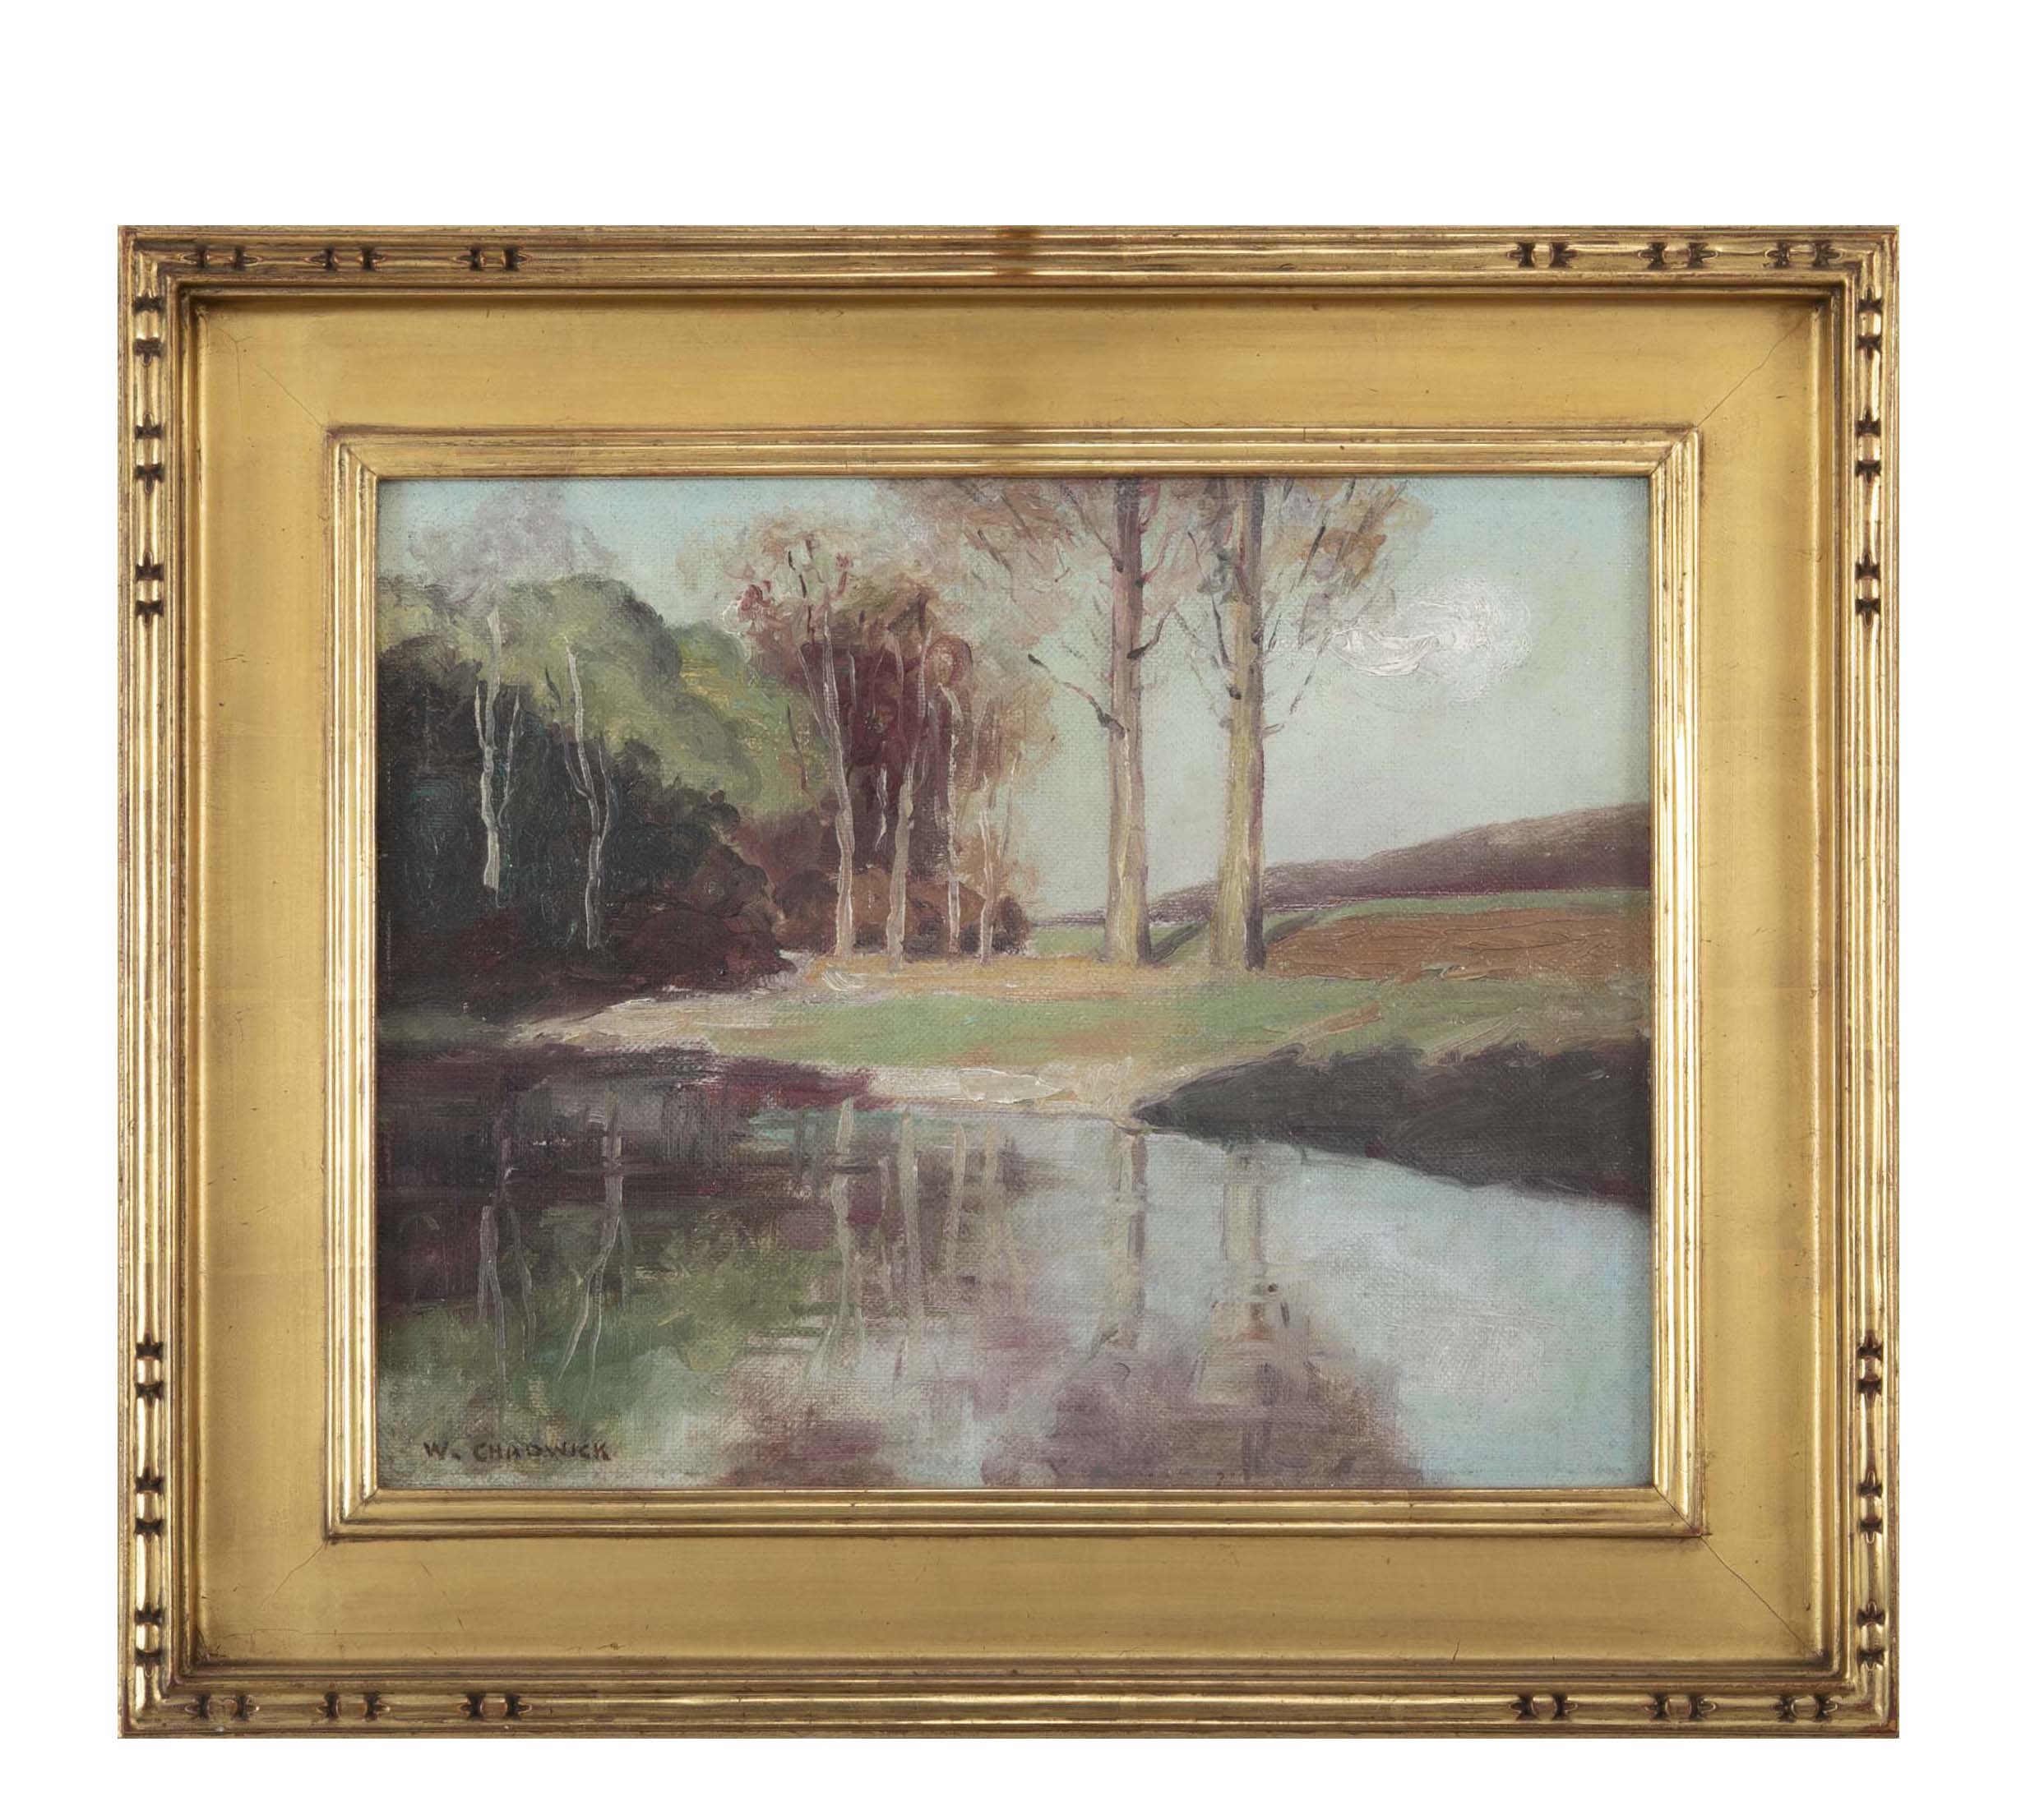 "Edge of the Pond" Oil on Canvas by William Chadwick